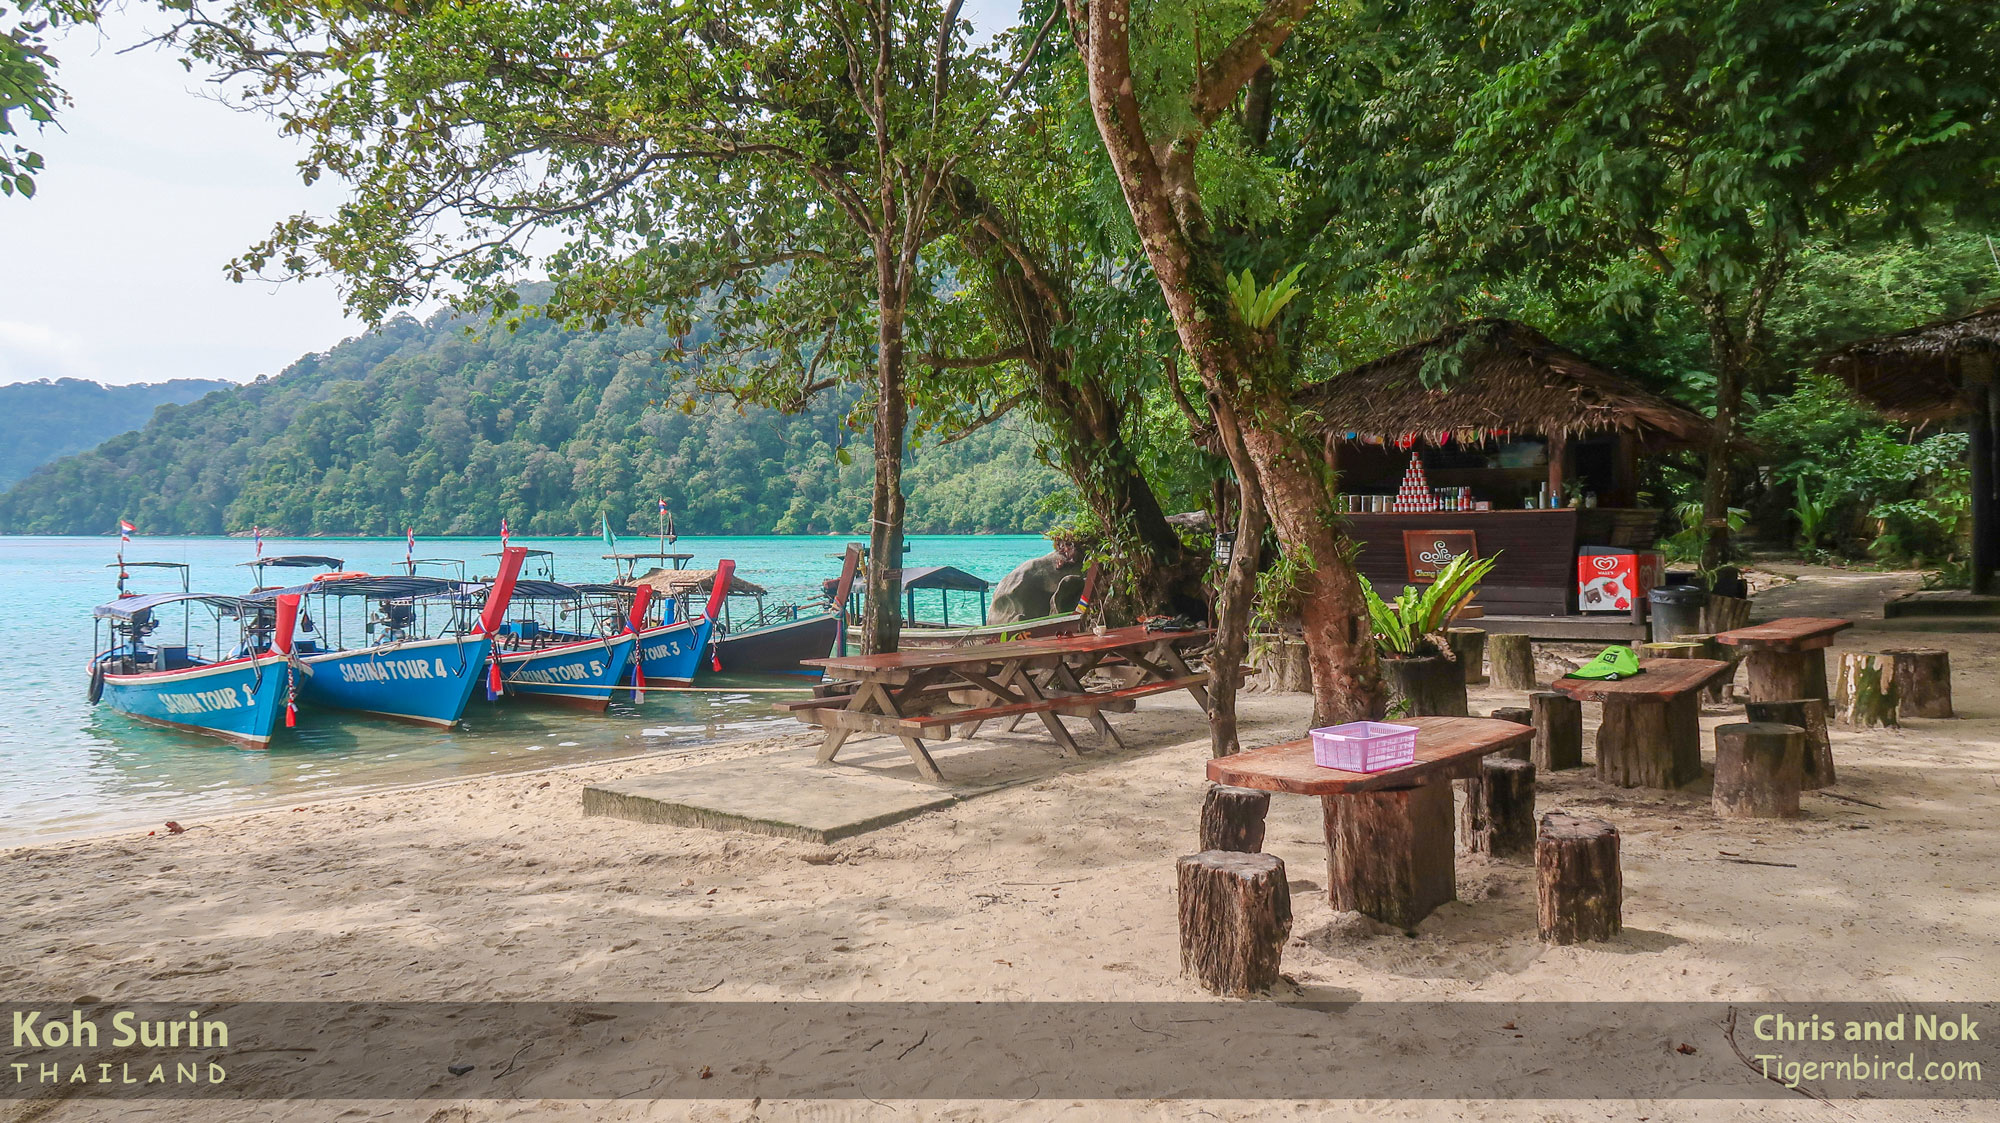 Coffee stands and picnic tables at Chong Khat Bay National Park Station on Surin Islands Thailand